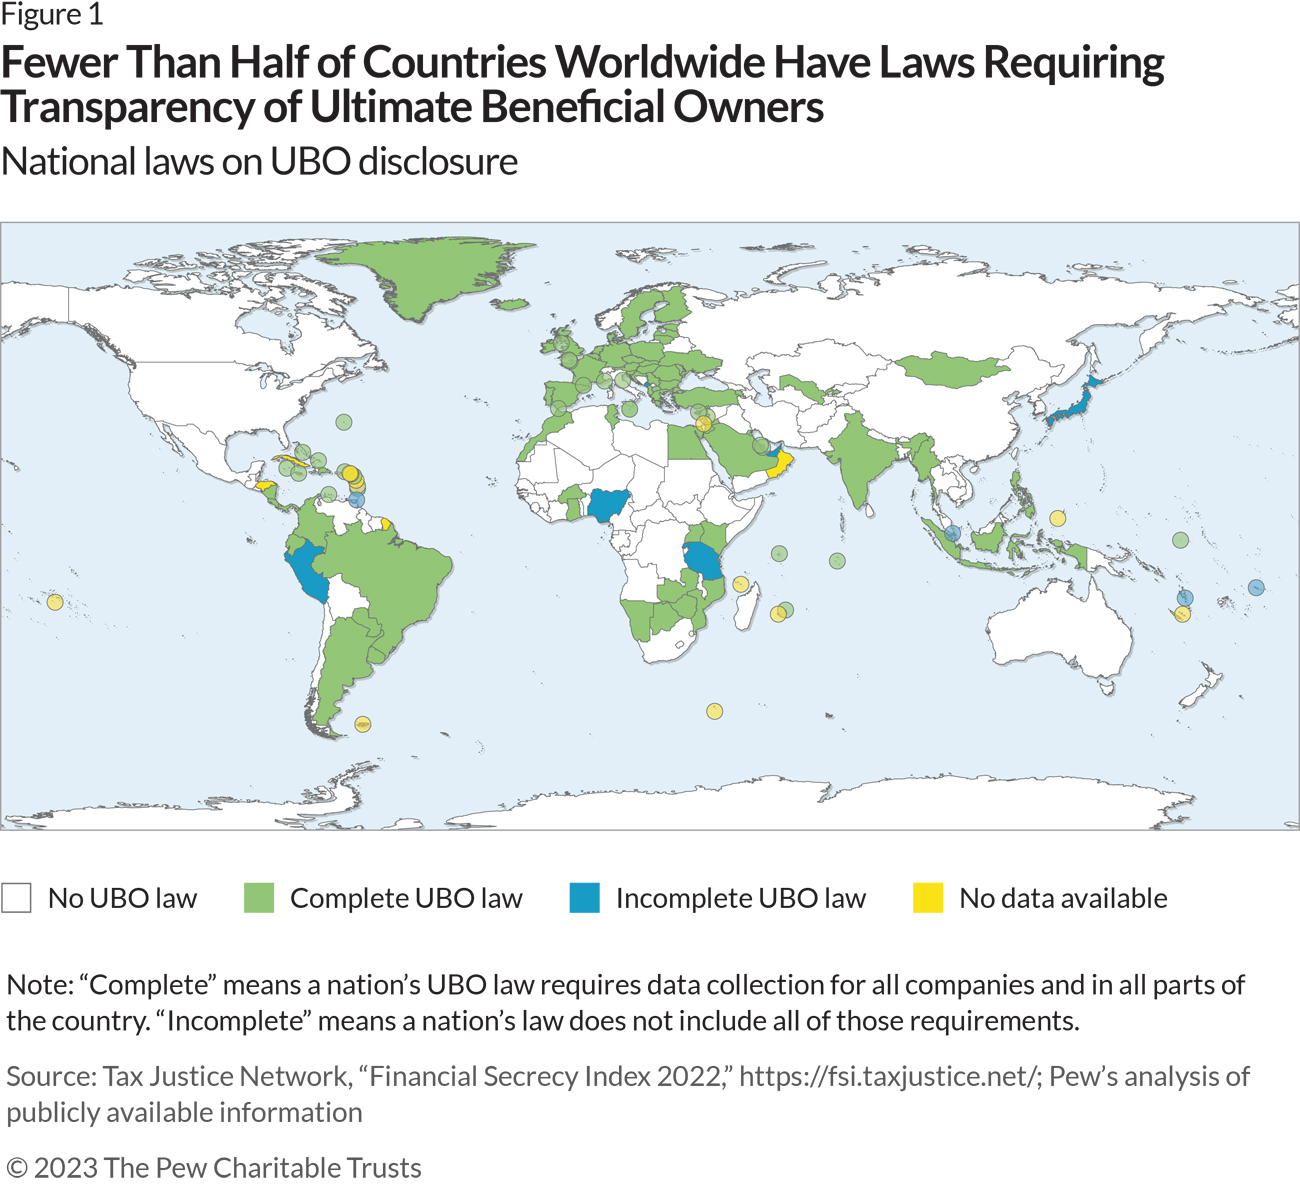 A world map depicting countries and territories that have ultimate beneficial ownership (UBO) laws in place. Ninety countries, shown in green and largely concentrated in South America, Europe, Southeastern Africa, and South Asia, have complete UBO laws. Twelve nations, in blue, have incomplete laws. No data was available for 26 countries, which are shown in yellow, and the remaining nations, in white, have no UBO laws. 